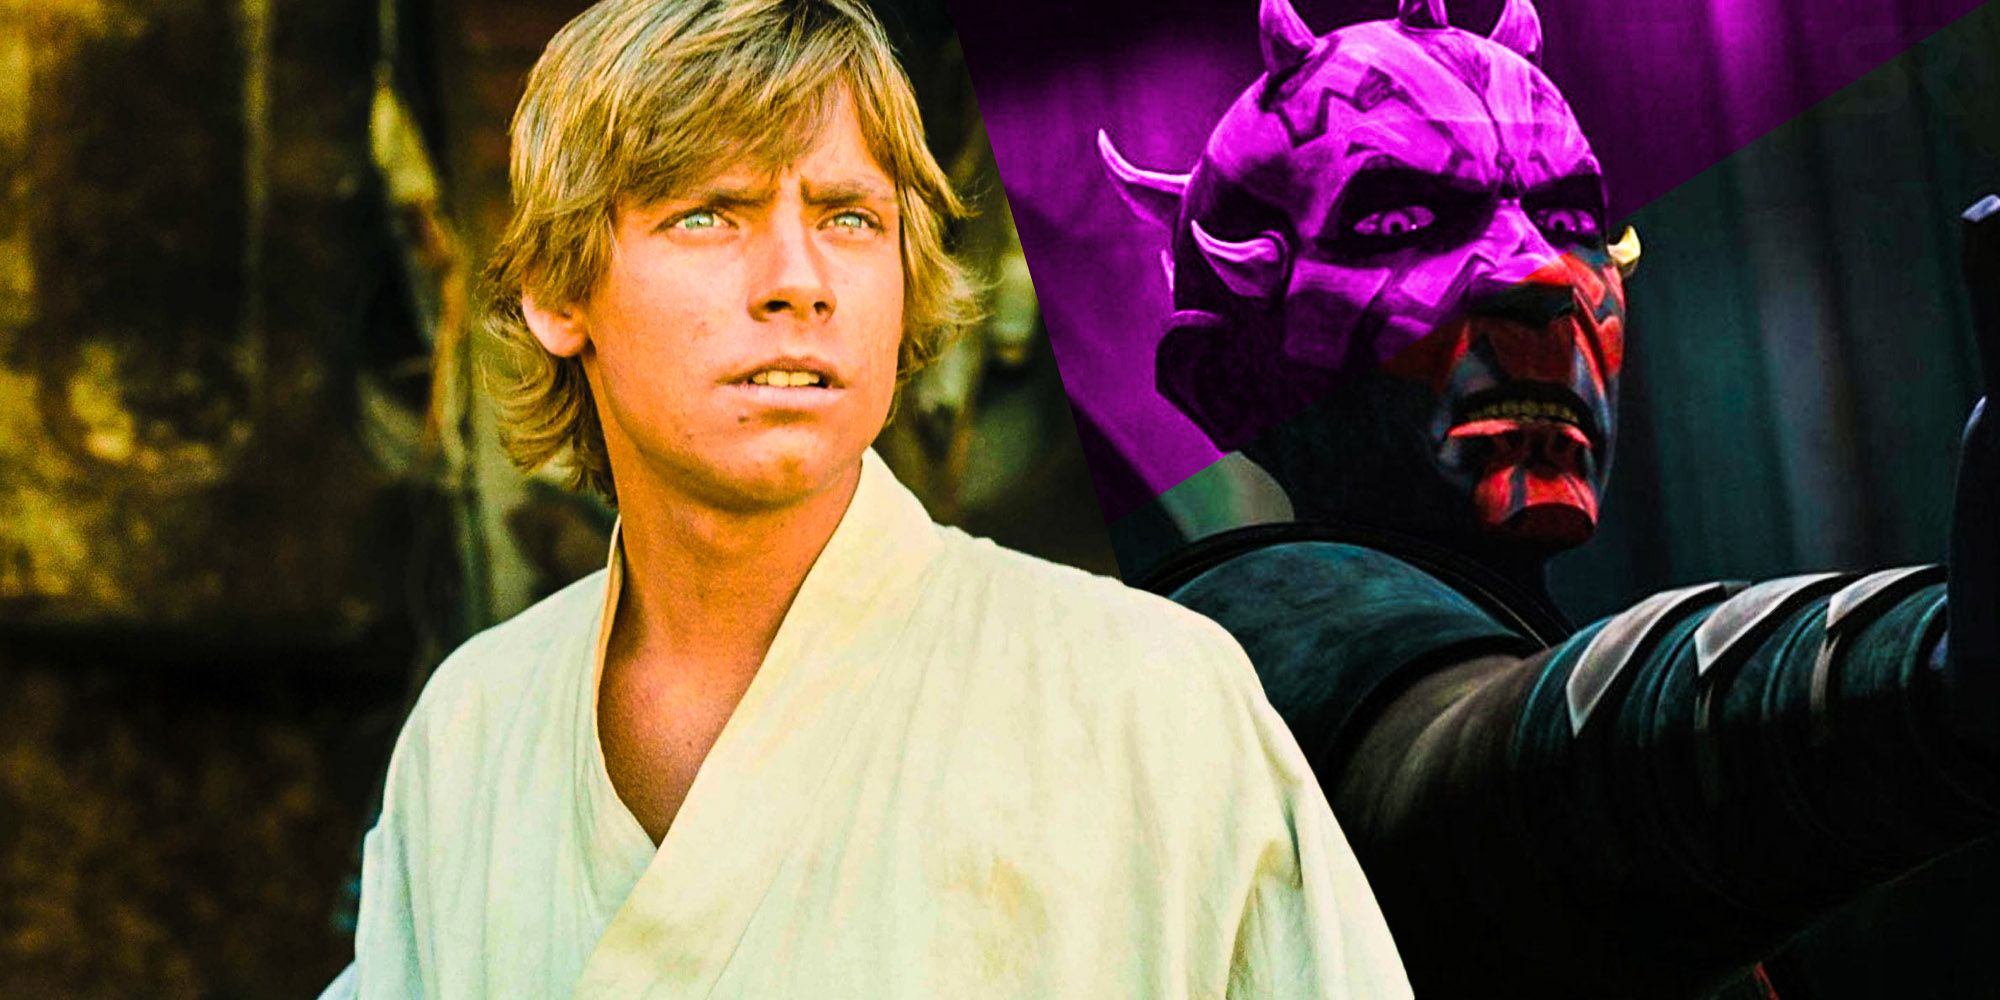 Star Wars Why Maul Believed Luke Would Avenge Him (Not Just The Jedi)